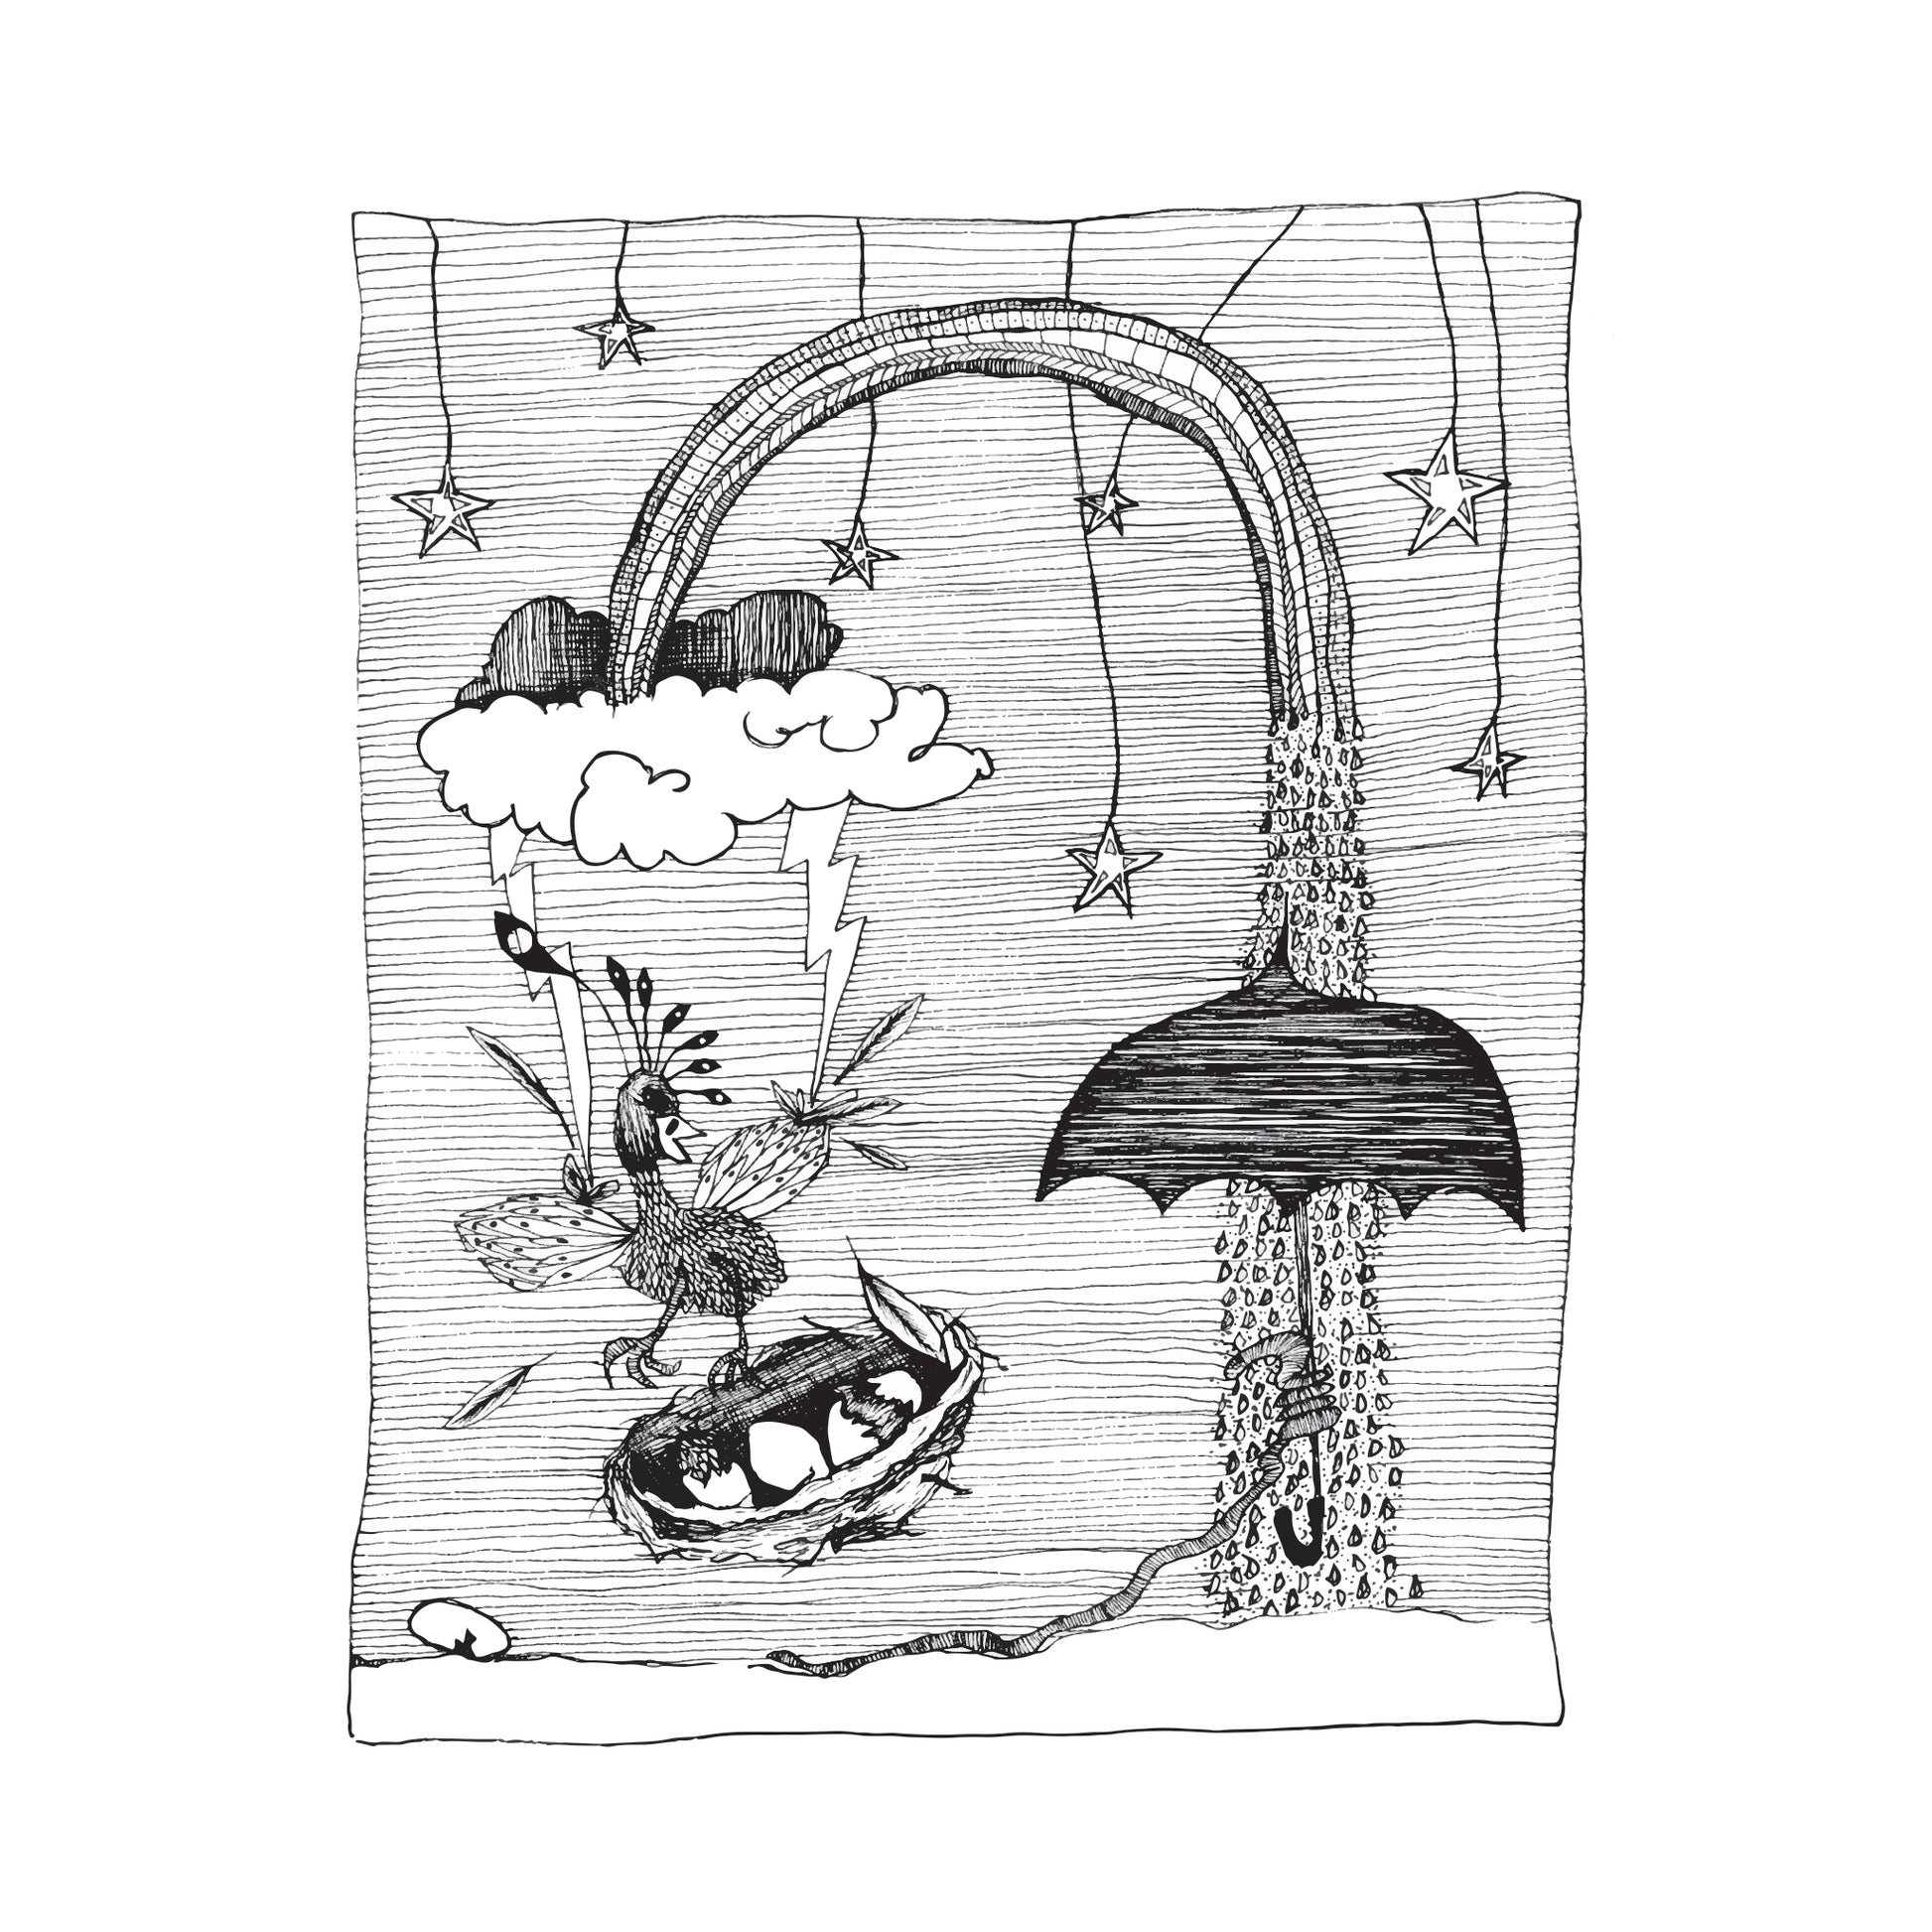 black and white illustration of a bird dropping its egg filled nest as it is hit by lightening from a cloud under a rainbow, meanwhile, there is a worm under an umbrella at the other side of the rainbow watching